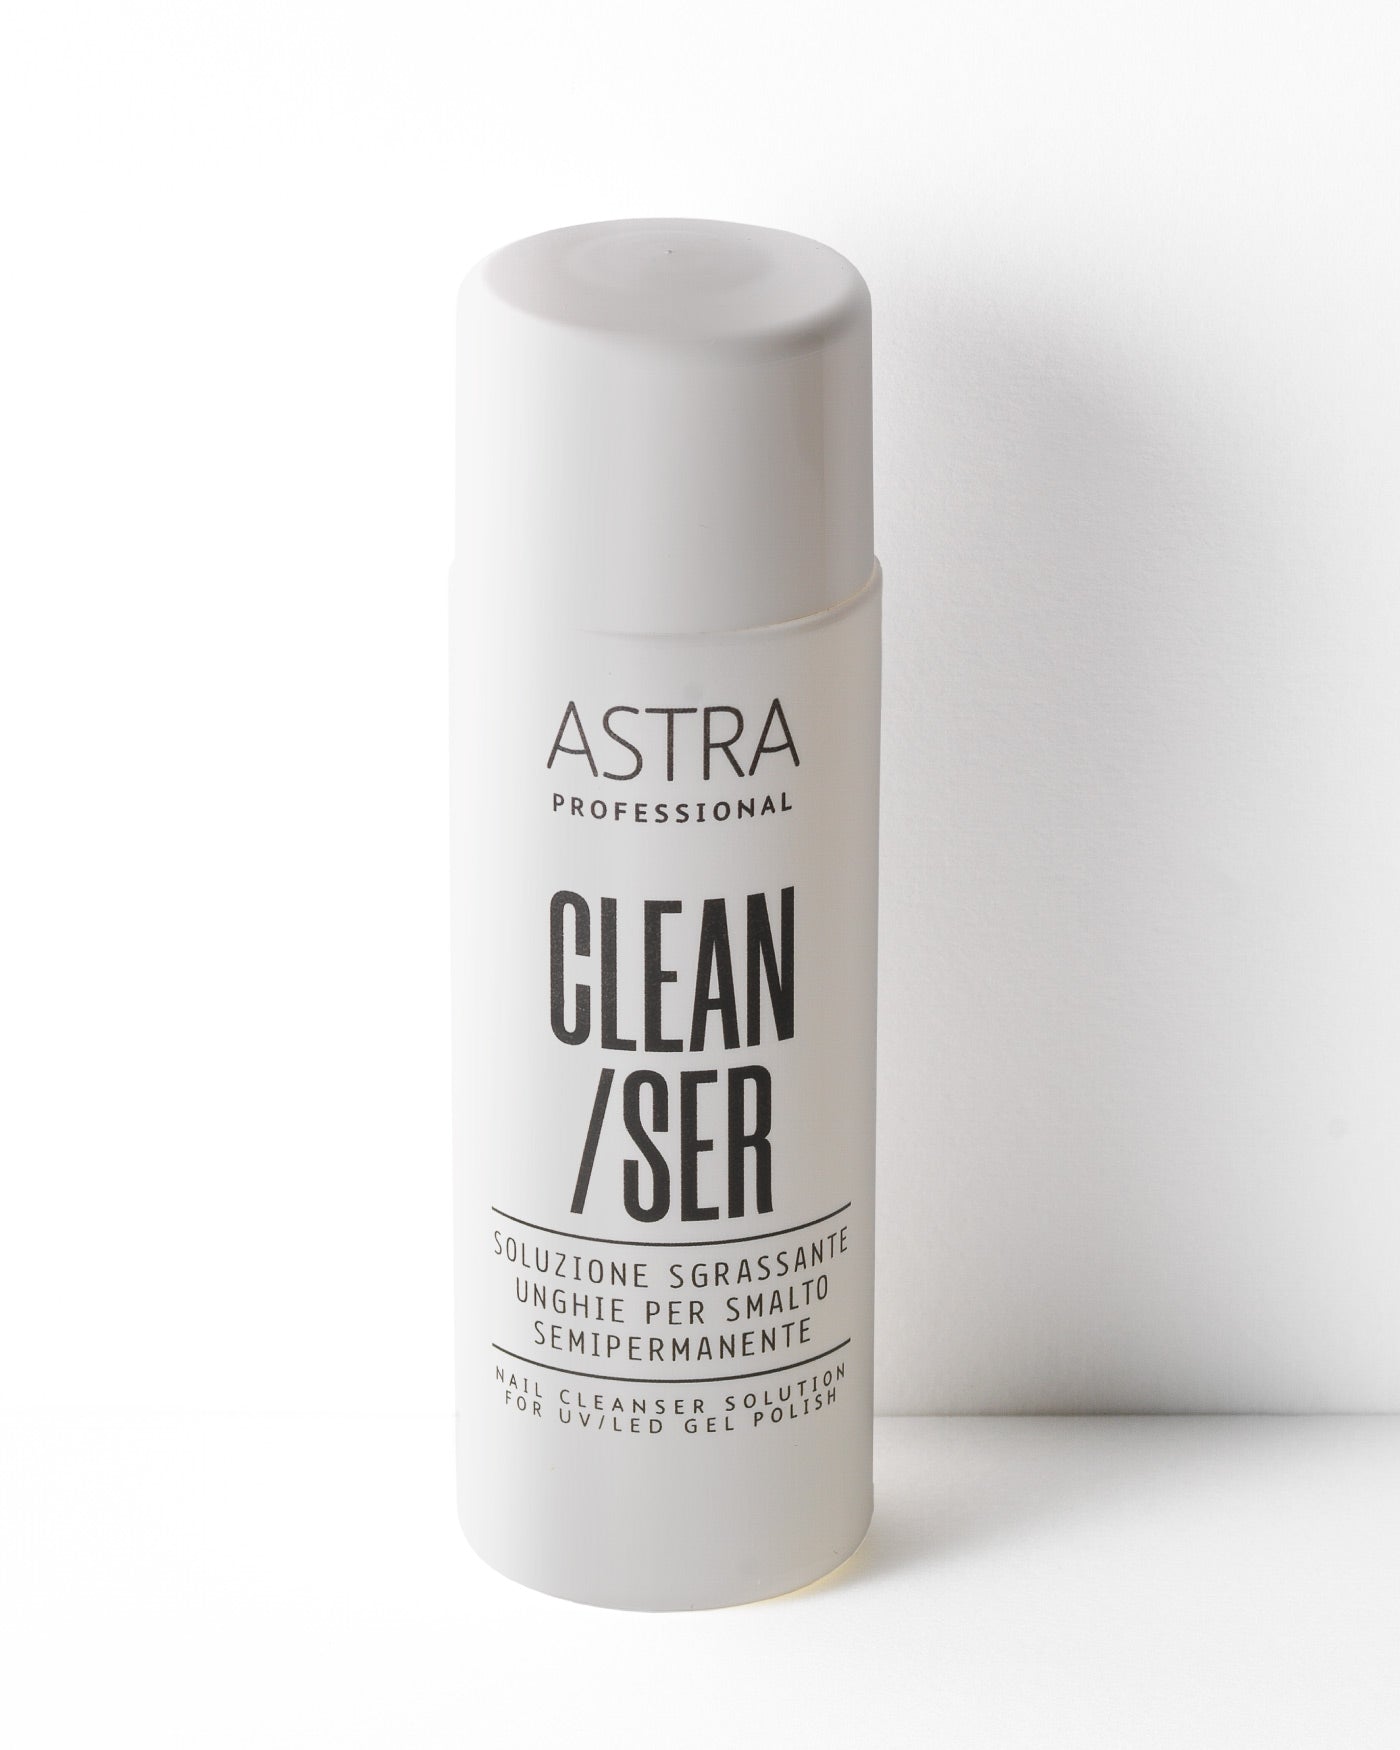 PROFESSIONAL CLEANSER - Professional - Astra Make-Up